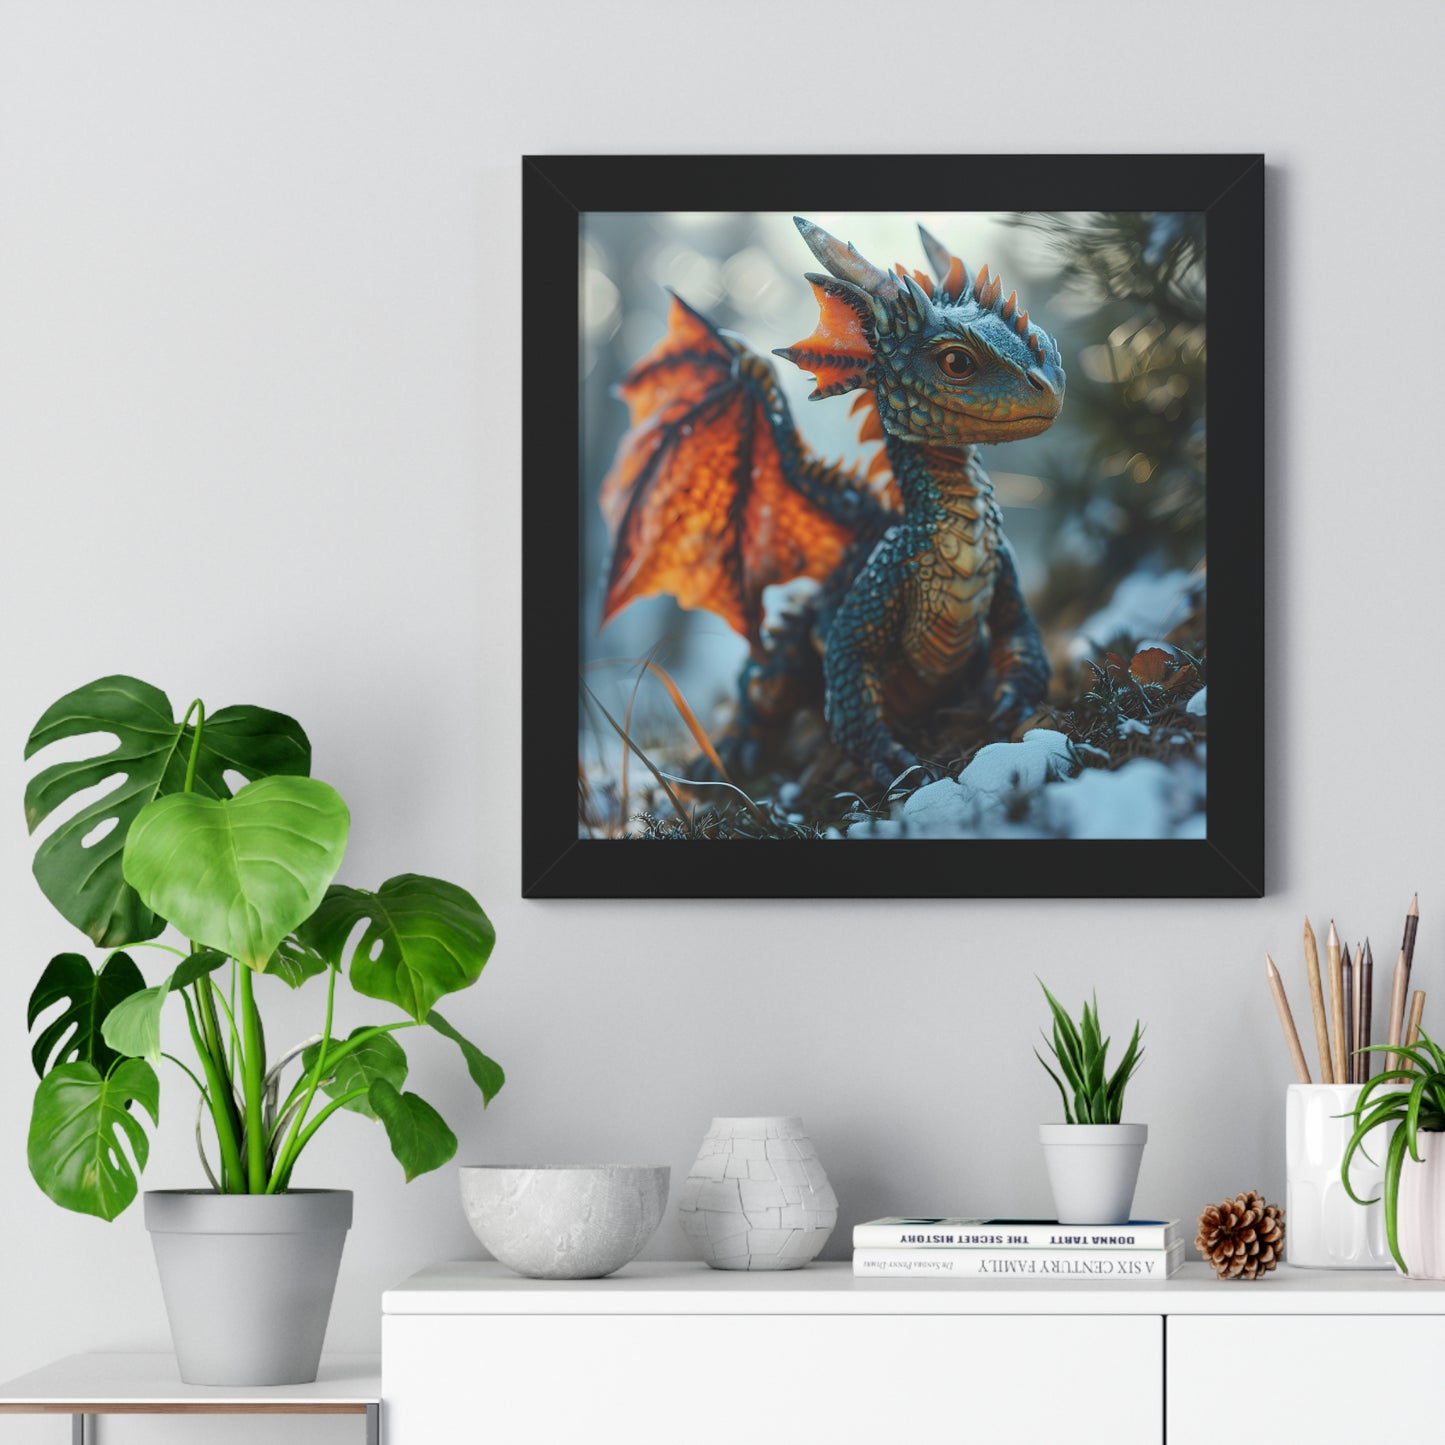 "Cool Guy" Baby Dragon - 1st Edition - FRAMED POSTER